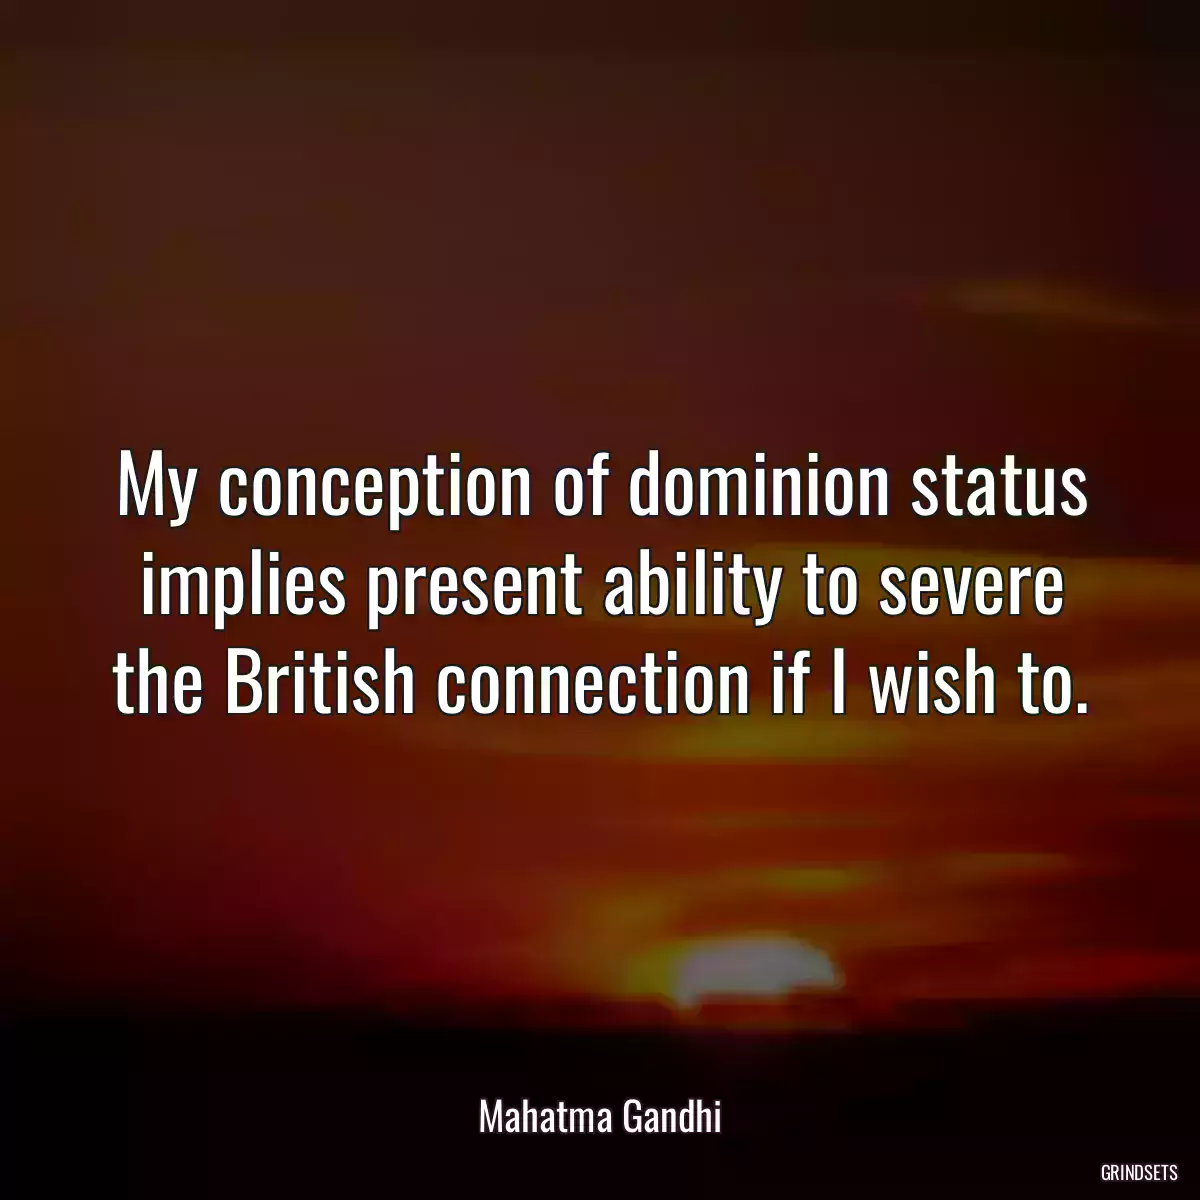 My conception of dominion status implies present ability to severe the British connection if I wish to.